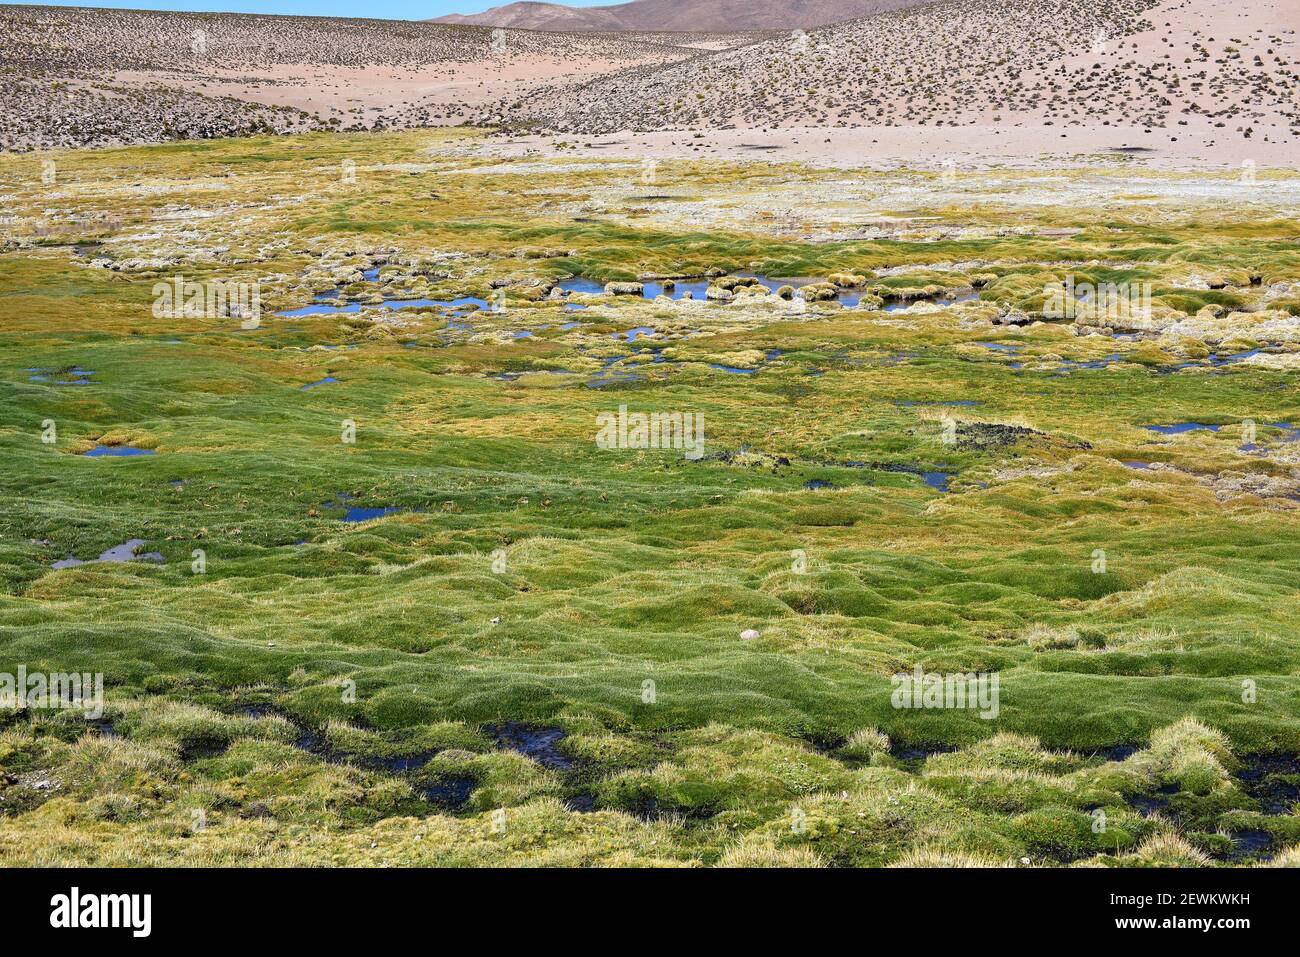 Bofedal (wetland) is a montane grassland whose dominant plant species are Distichia muscoides and Oxychloe andina (Juncaceae family). This photo was Stock Photo